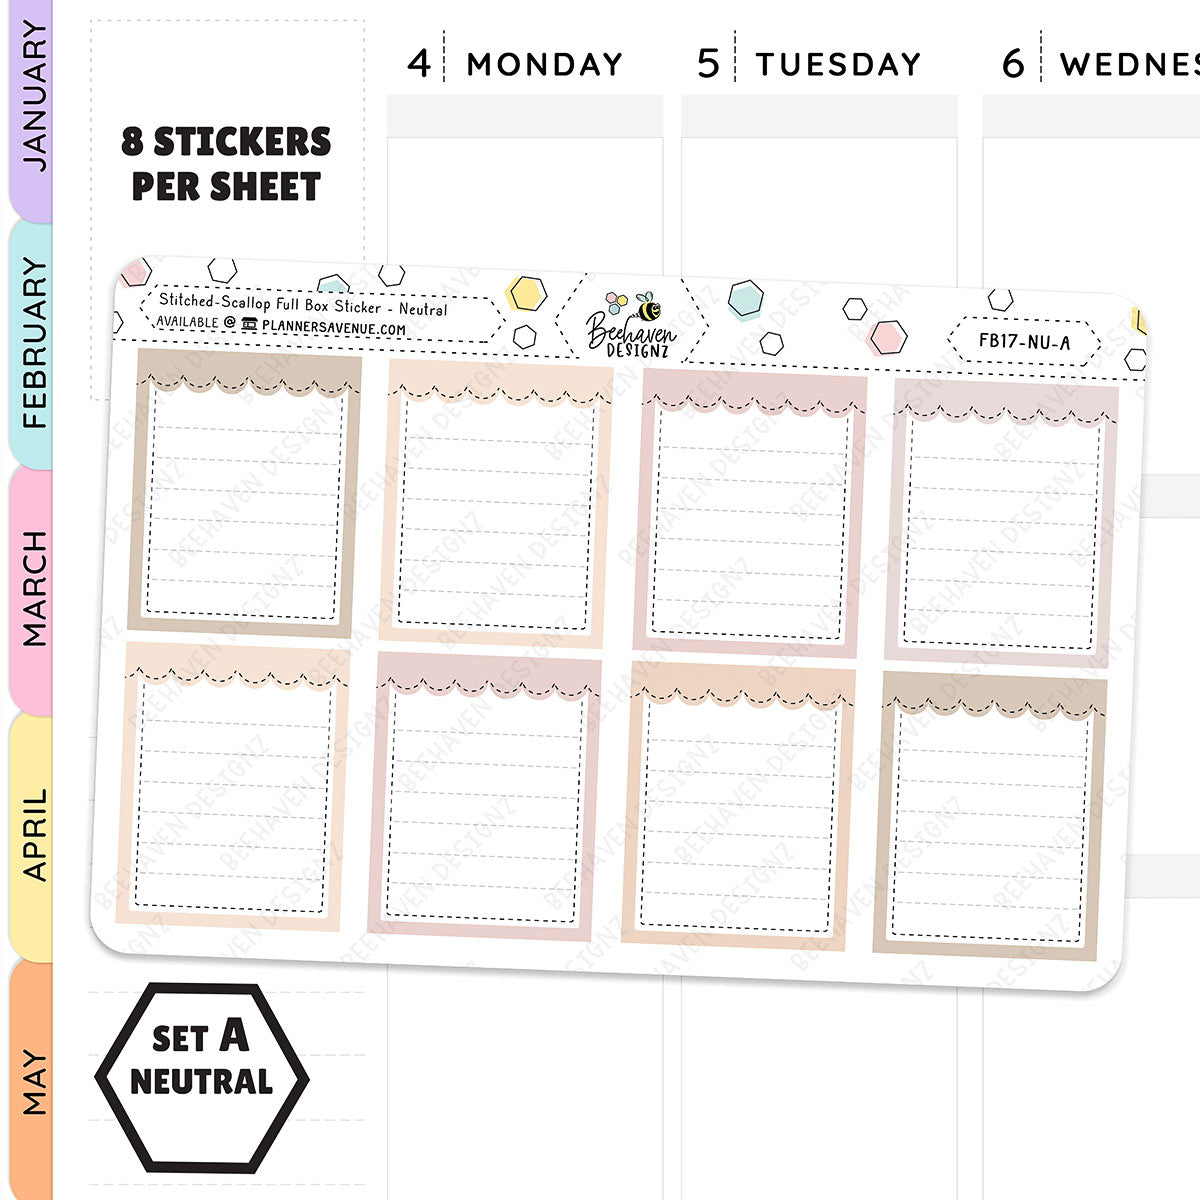 Stitched Scallop Full Box Planner Stickers